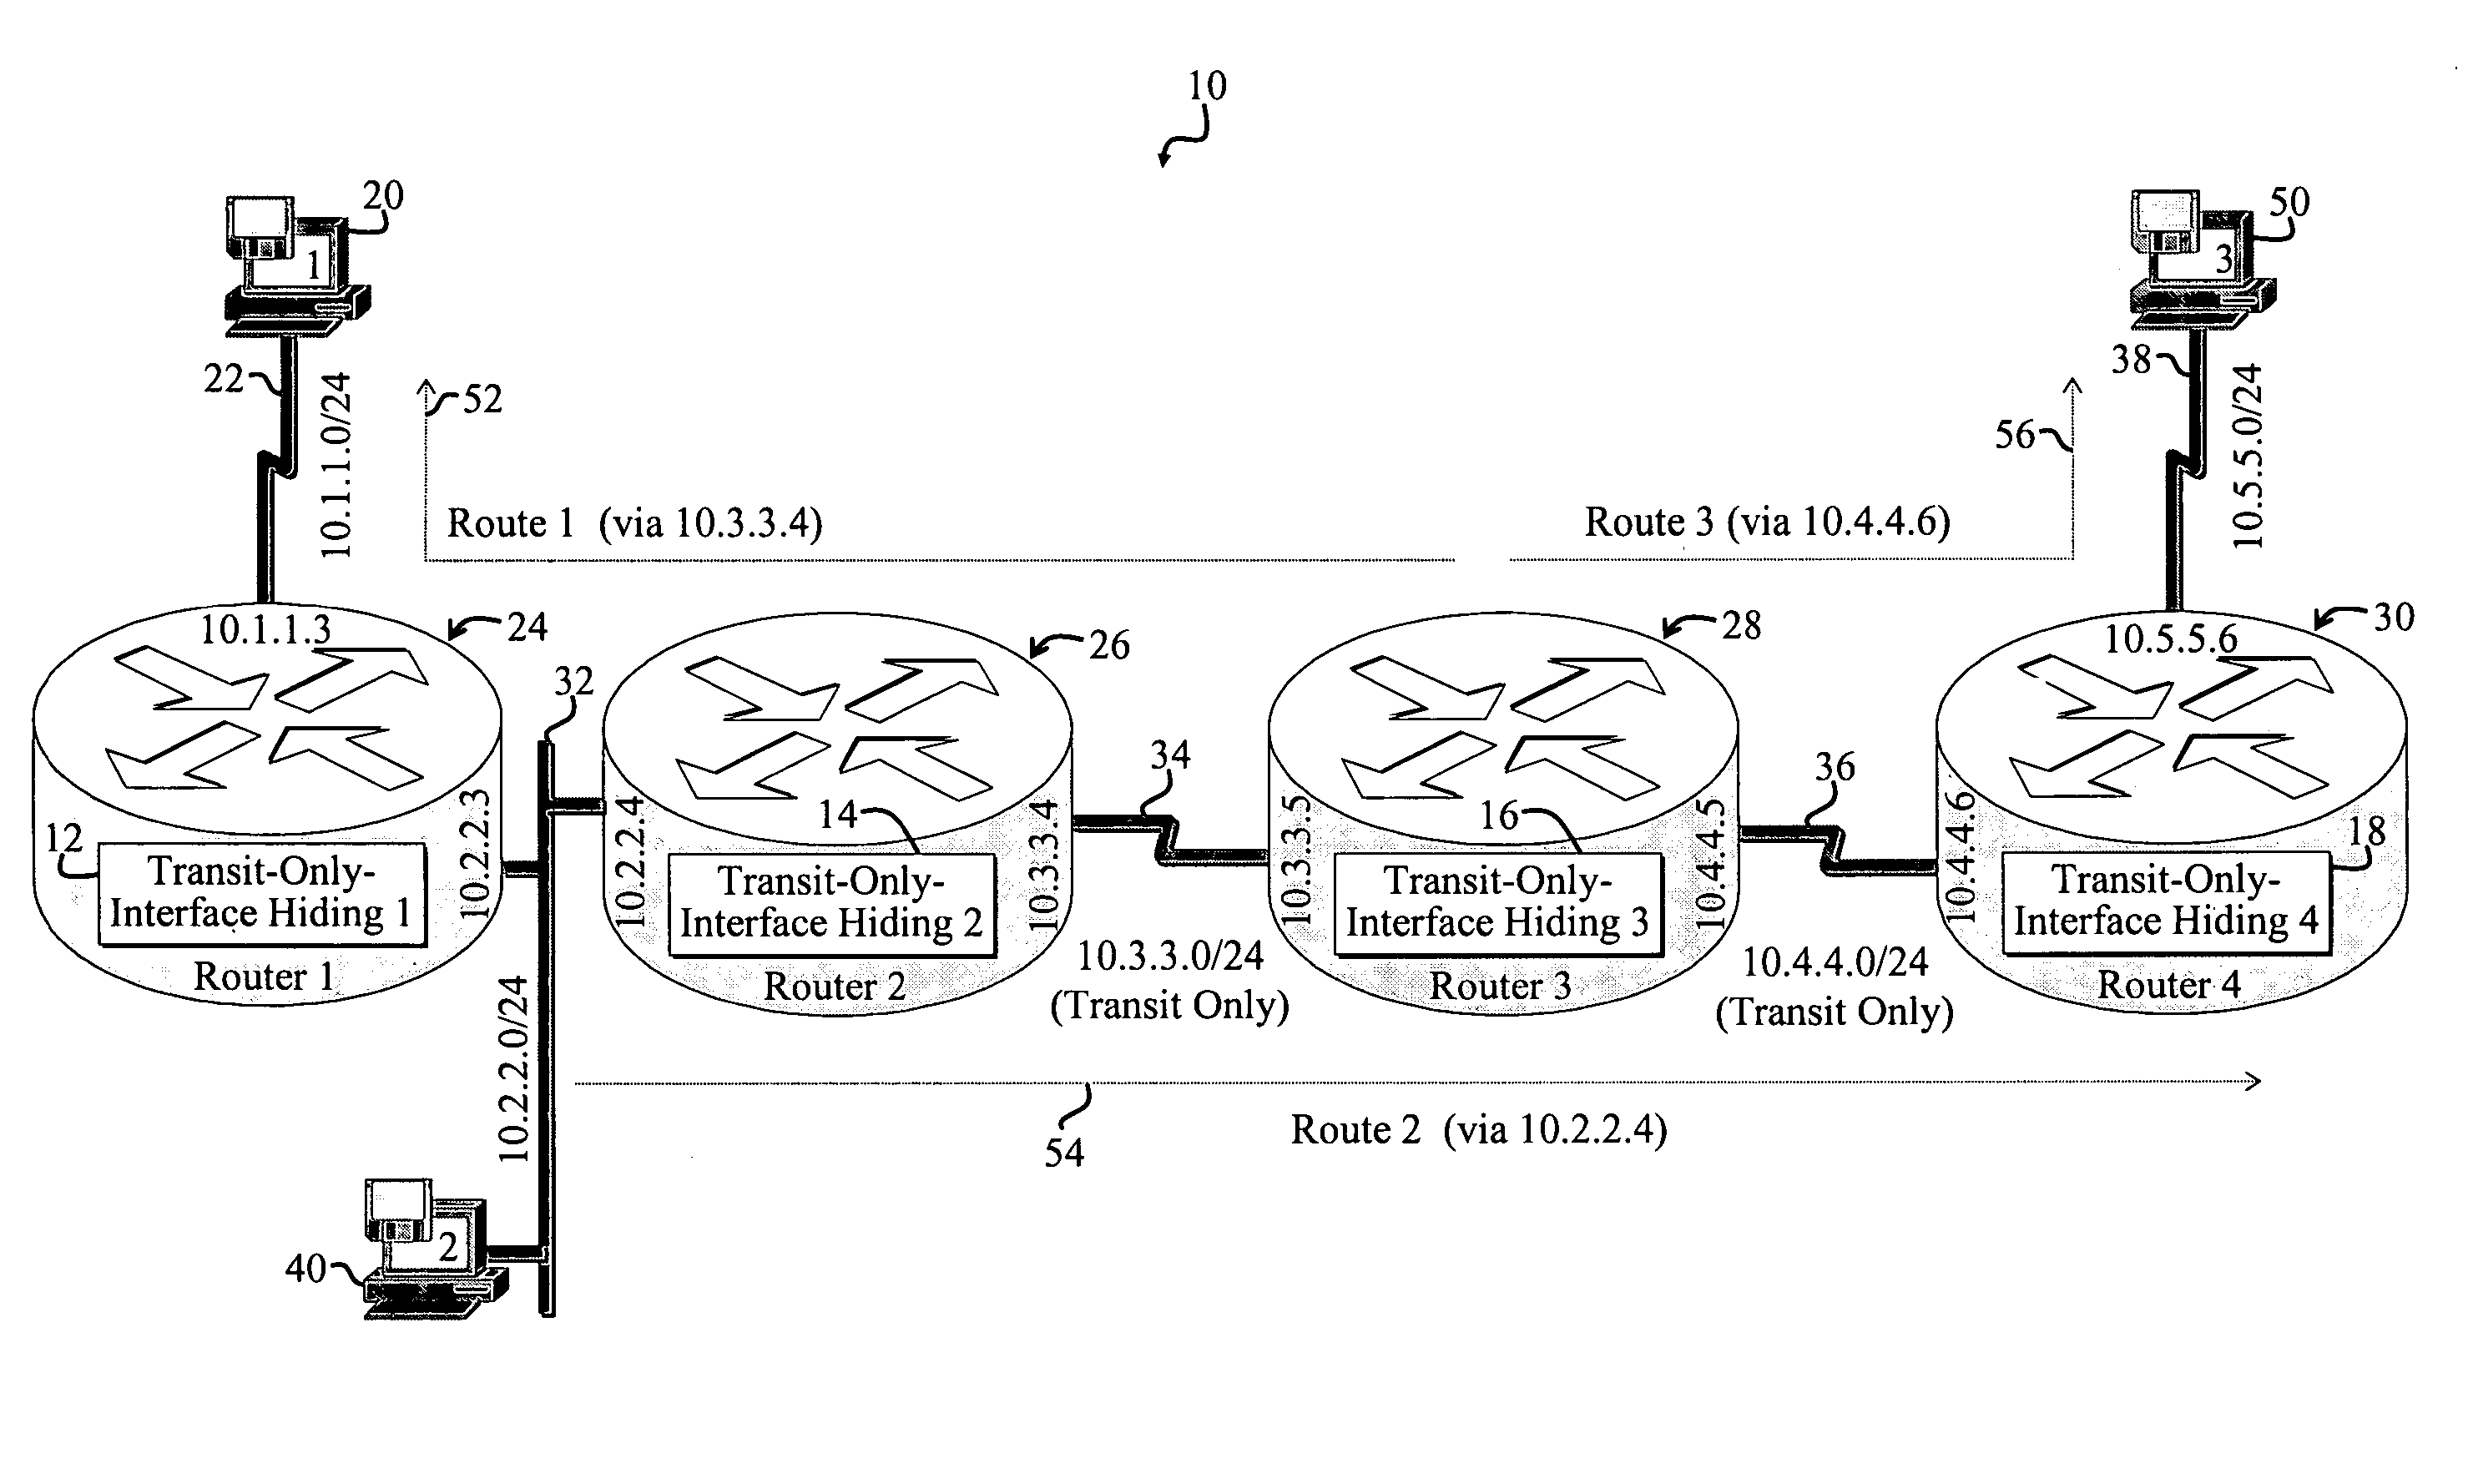 System and method for improving network performance and security by controlling topology information